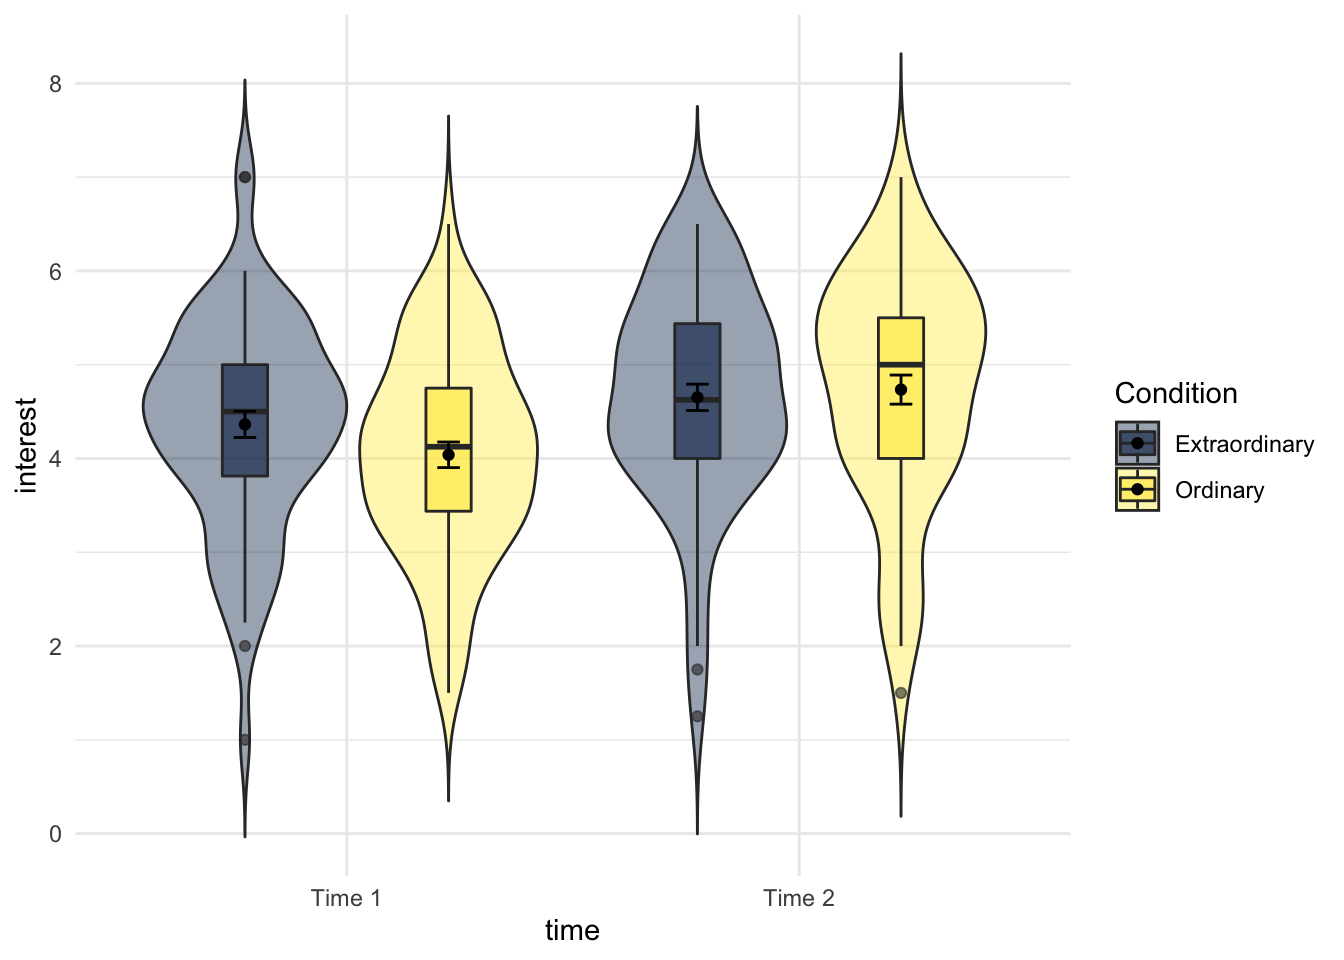 Violin-boxplot by condition and time